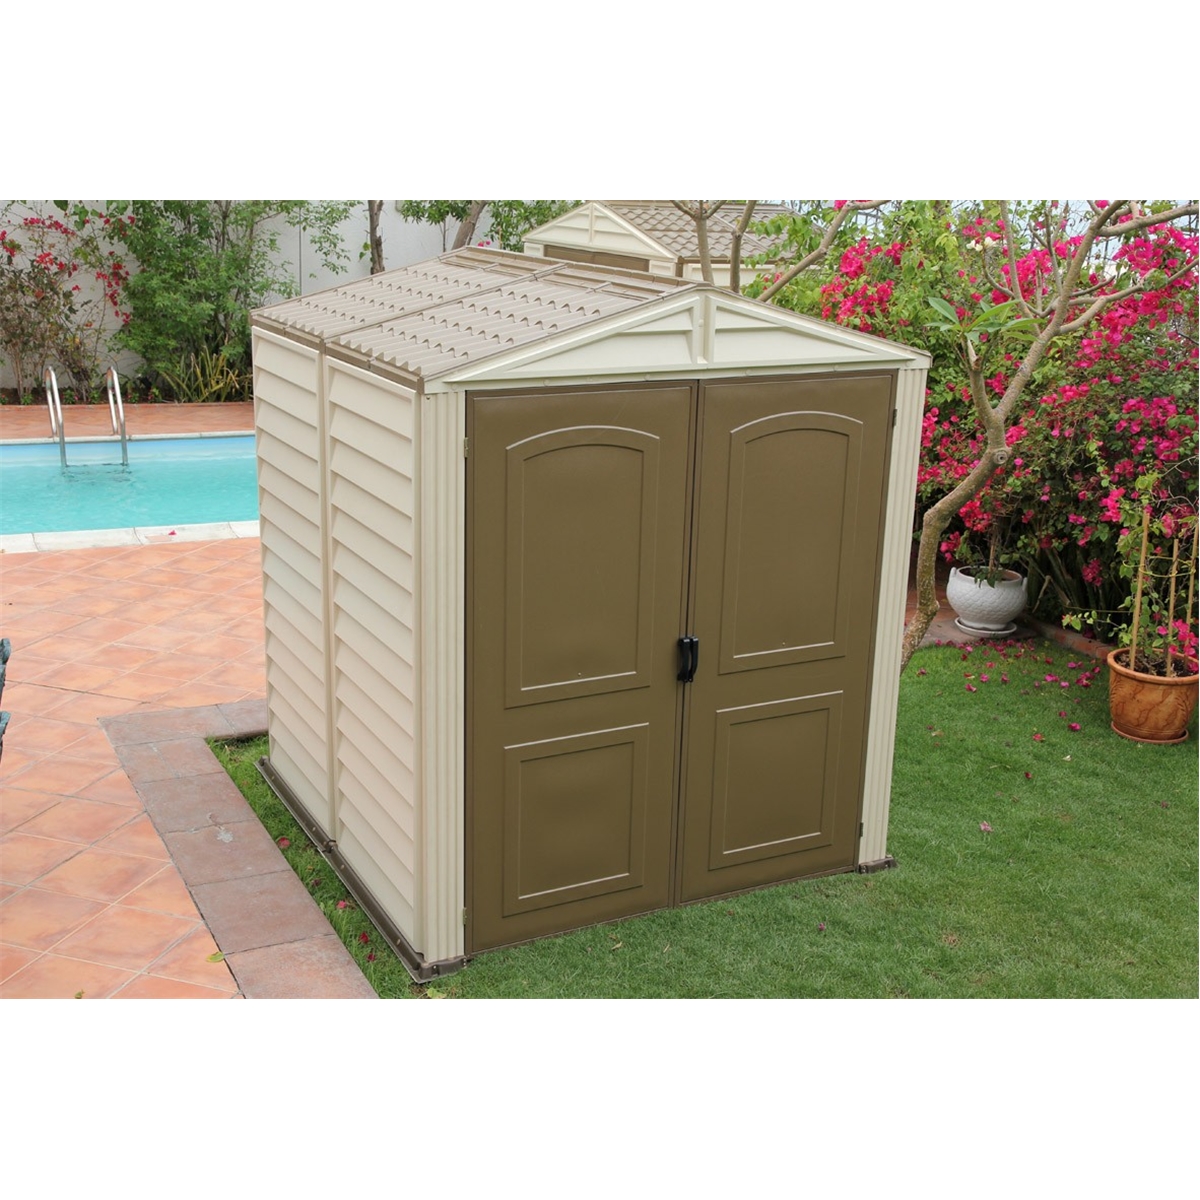 Deluxe Duramax Plastic PVC Shed With Steel Frame (1.73m x 0.97m ...